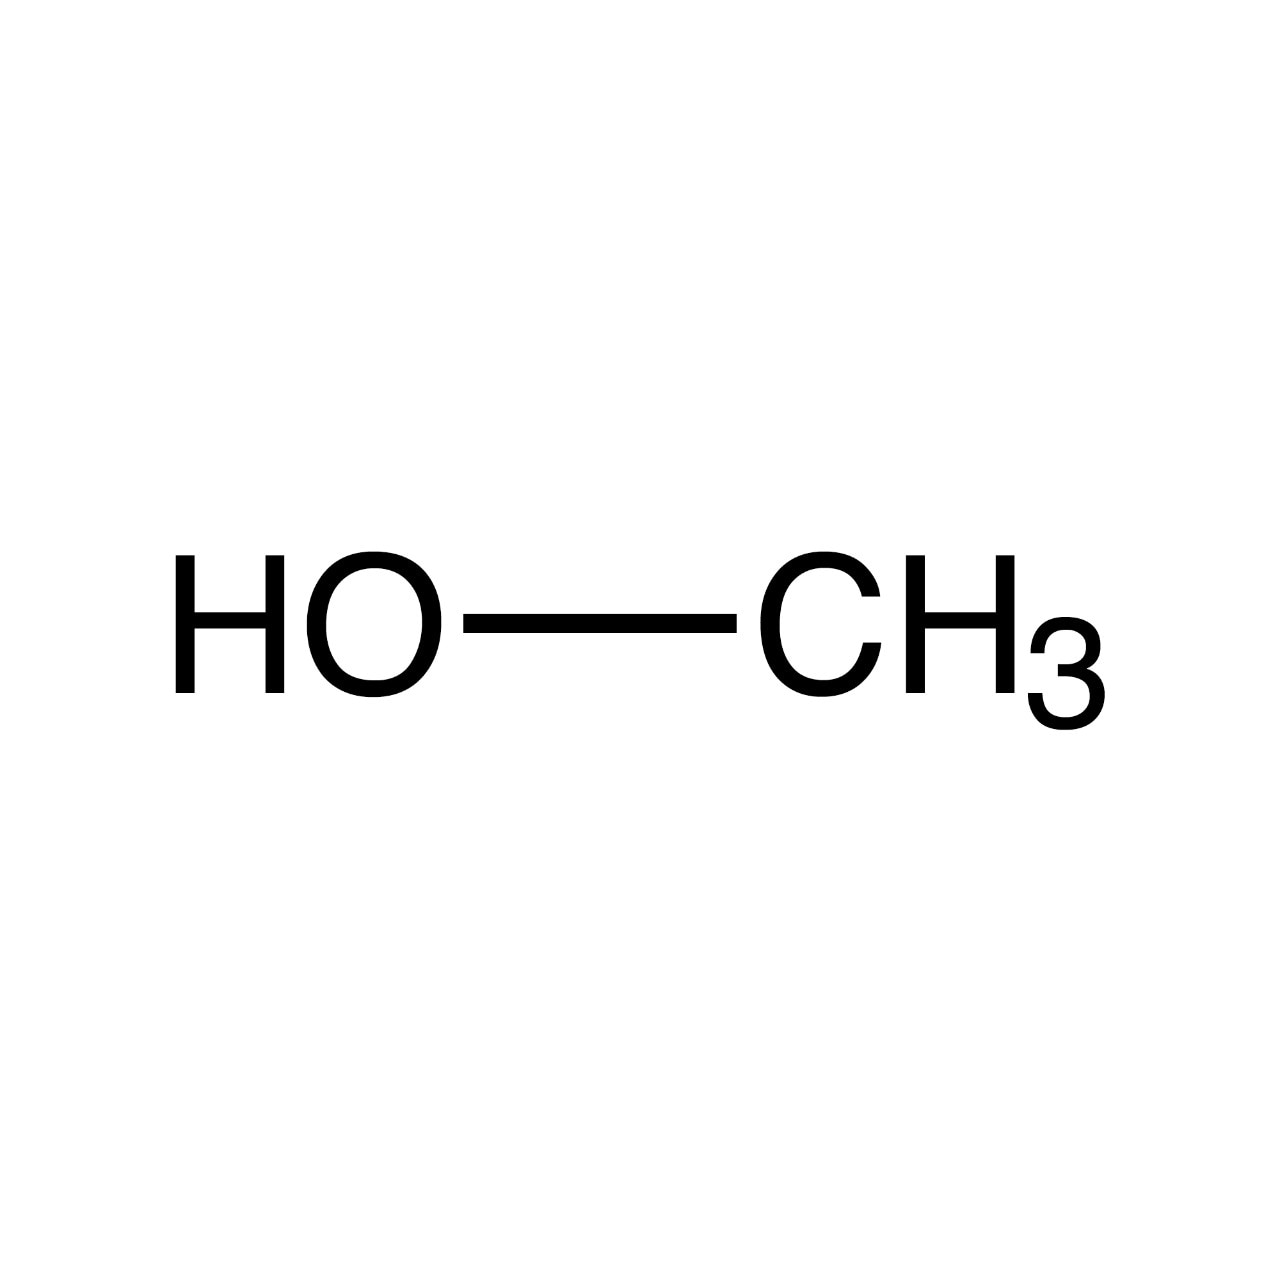 https://www.fishersci.co.uk/gb/en/products/chemicals/solvents/methanol/jcr%3Acontent/browse-results/browse_content/imageandrte_b805.img.jpg/1559053740074.jpg